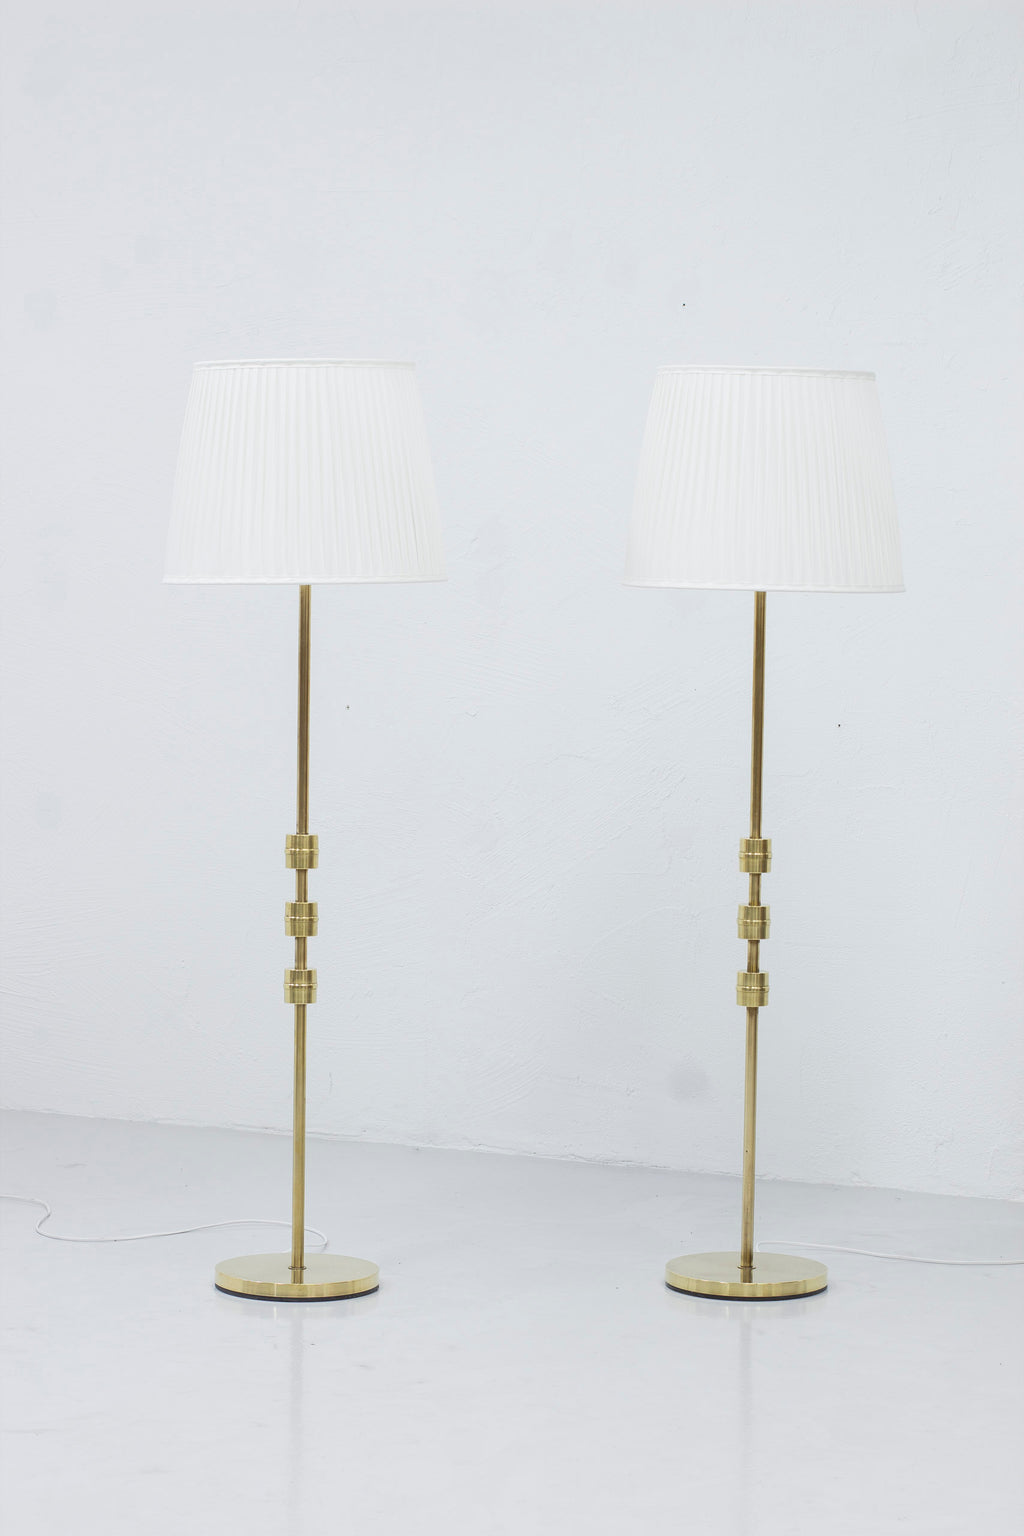 Floor lamp 2605 by Luco